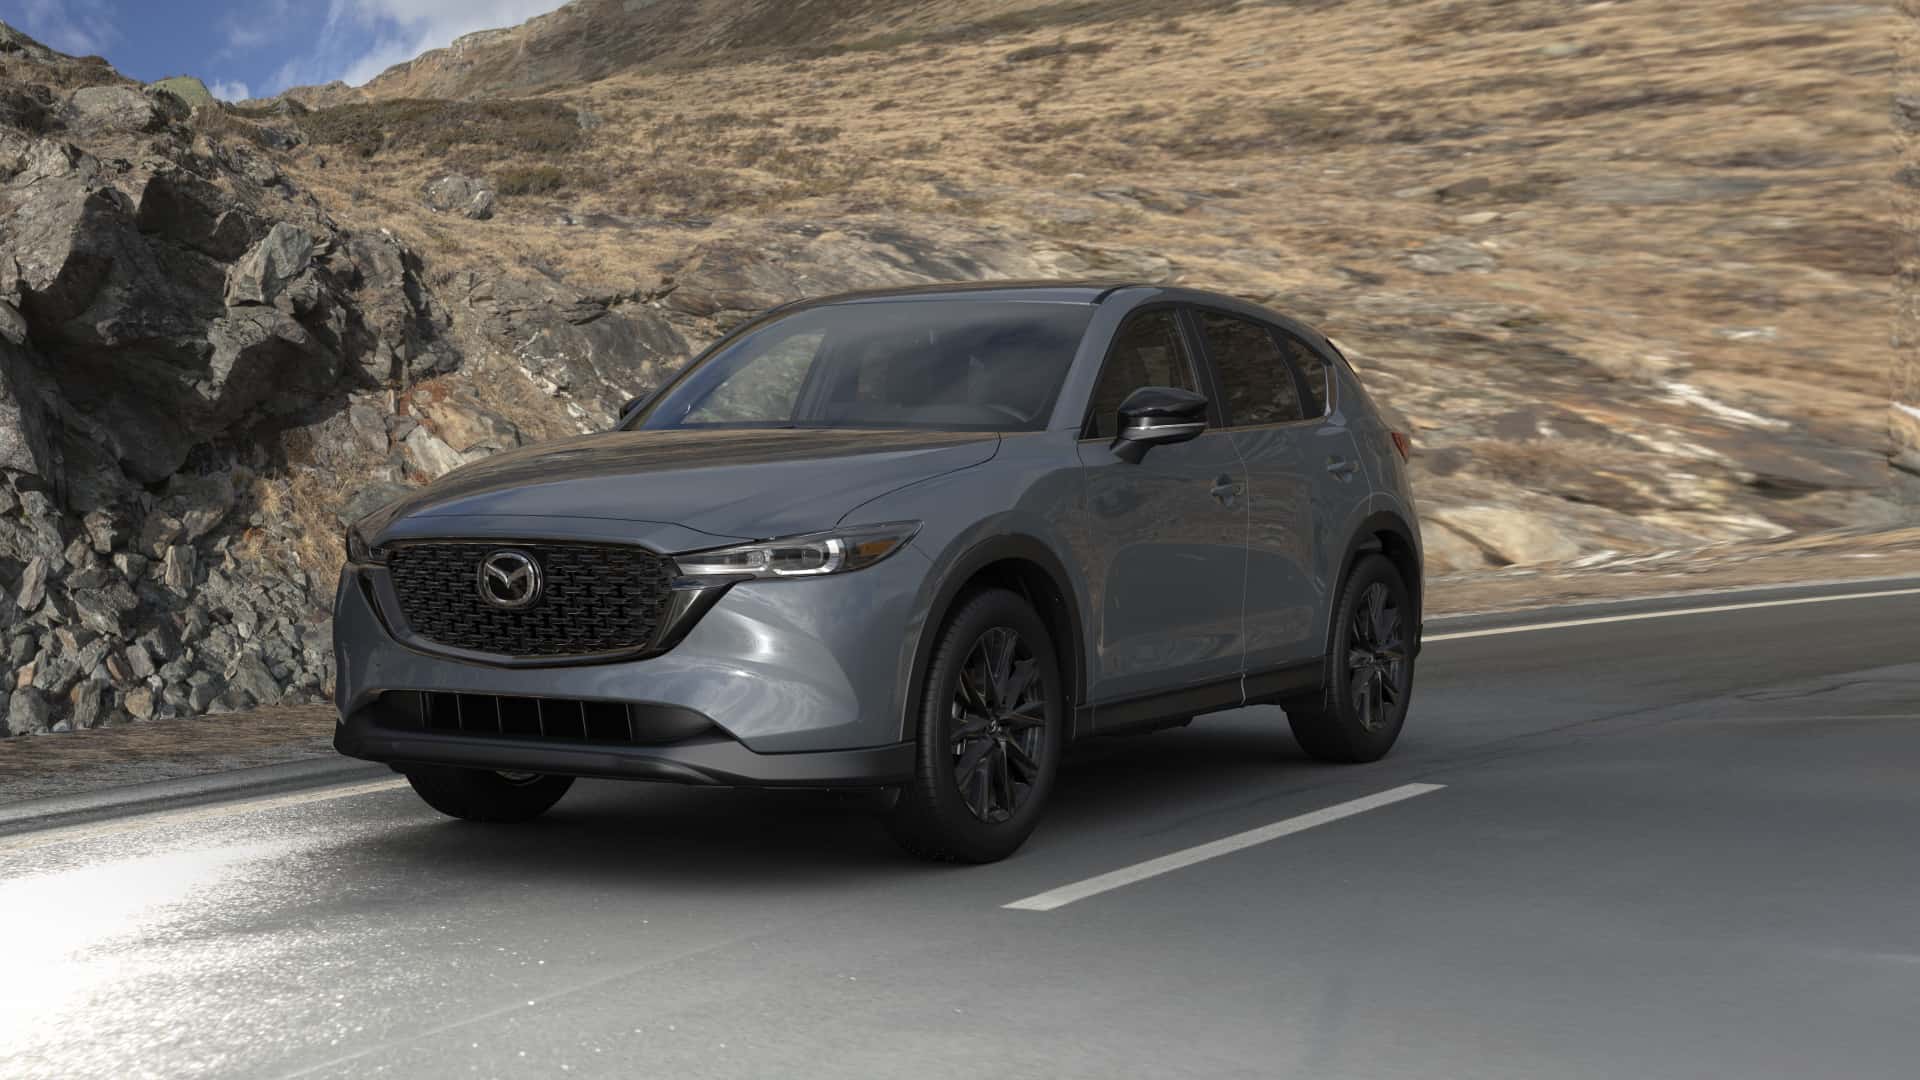 2023 Mazda CX-5 2.5 S Carbon Edition Polymetal Gray Metallic | Mazda of South Charlotte in Pineville NC